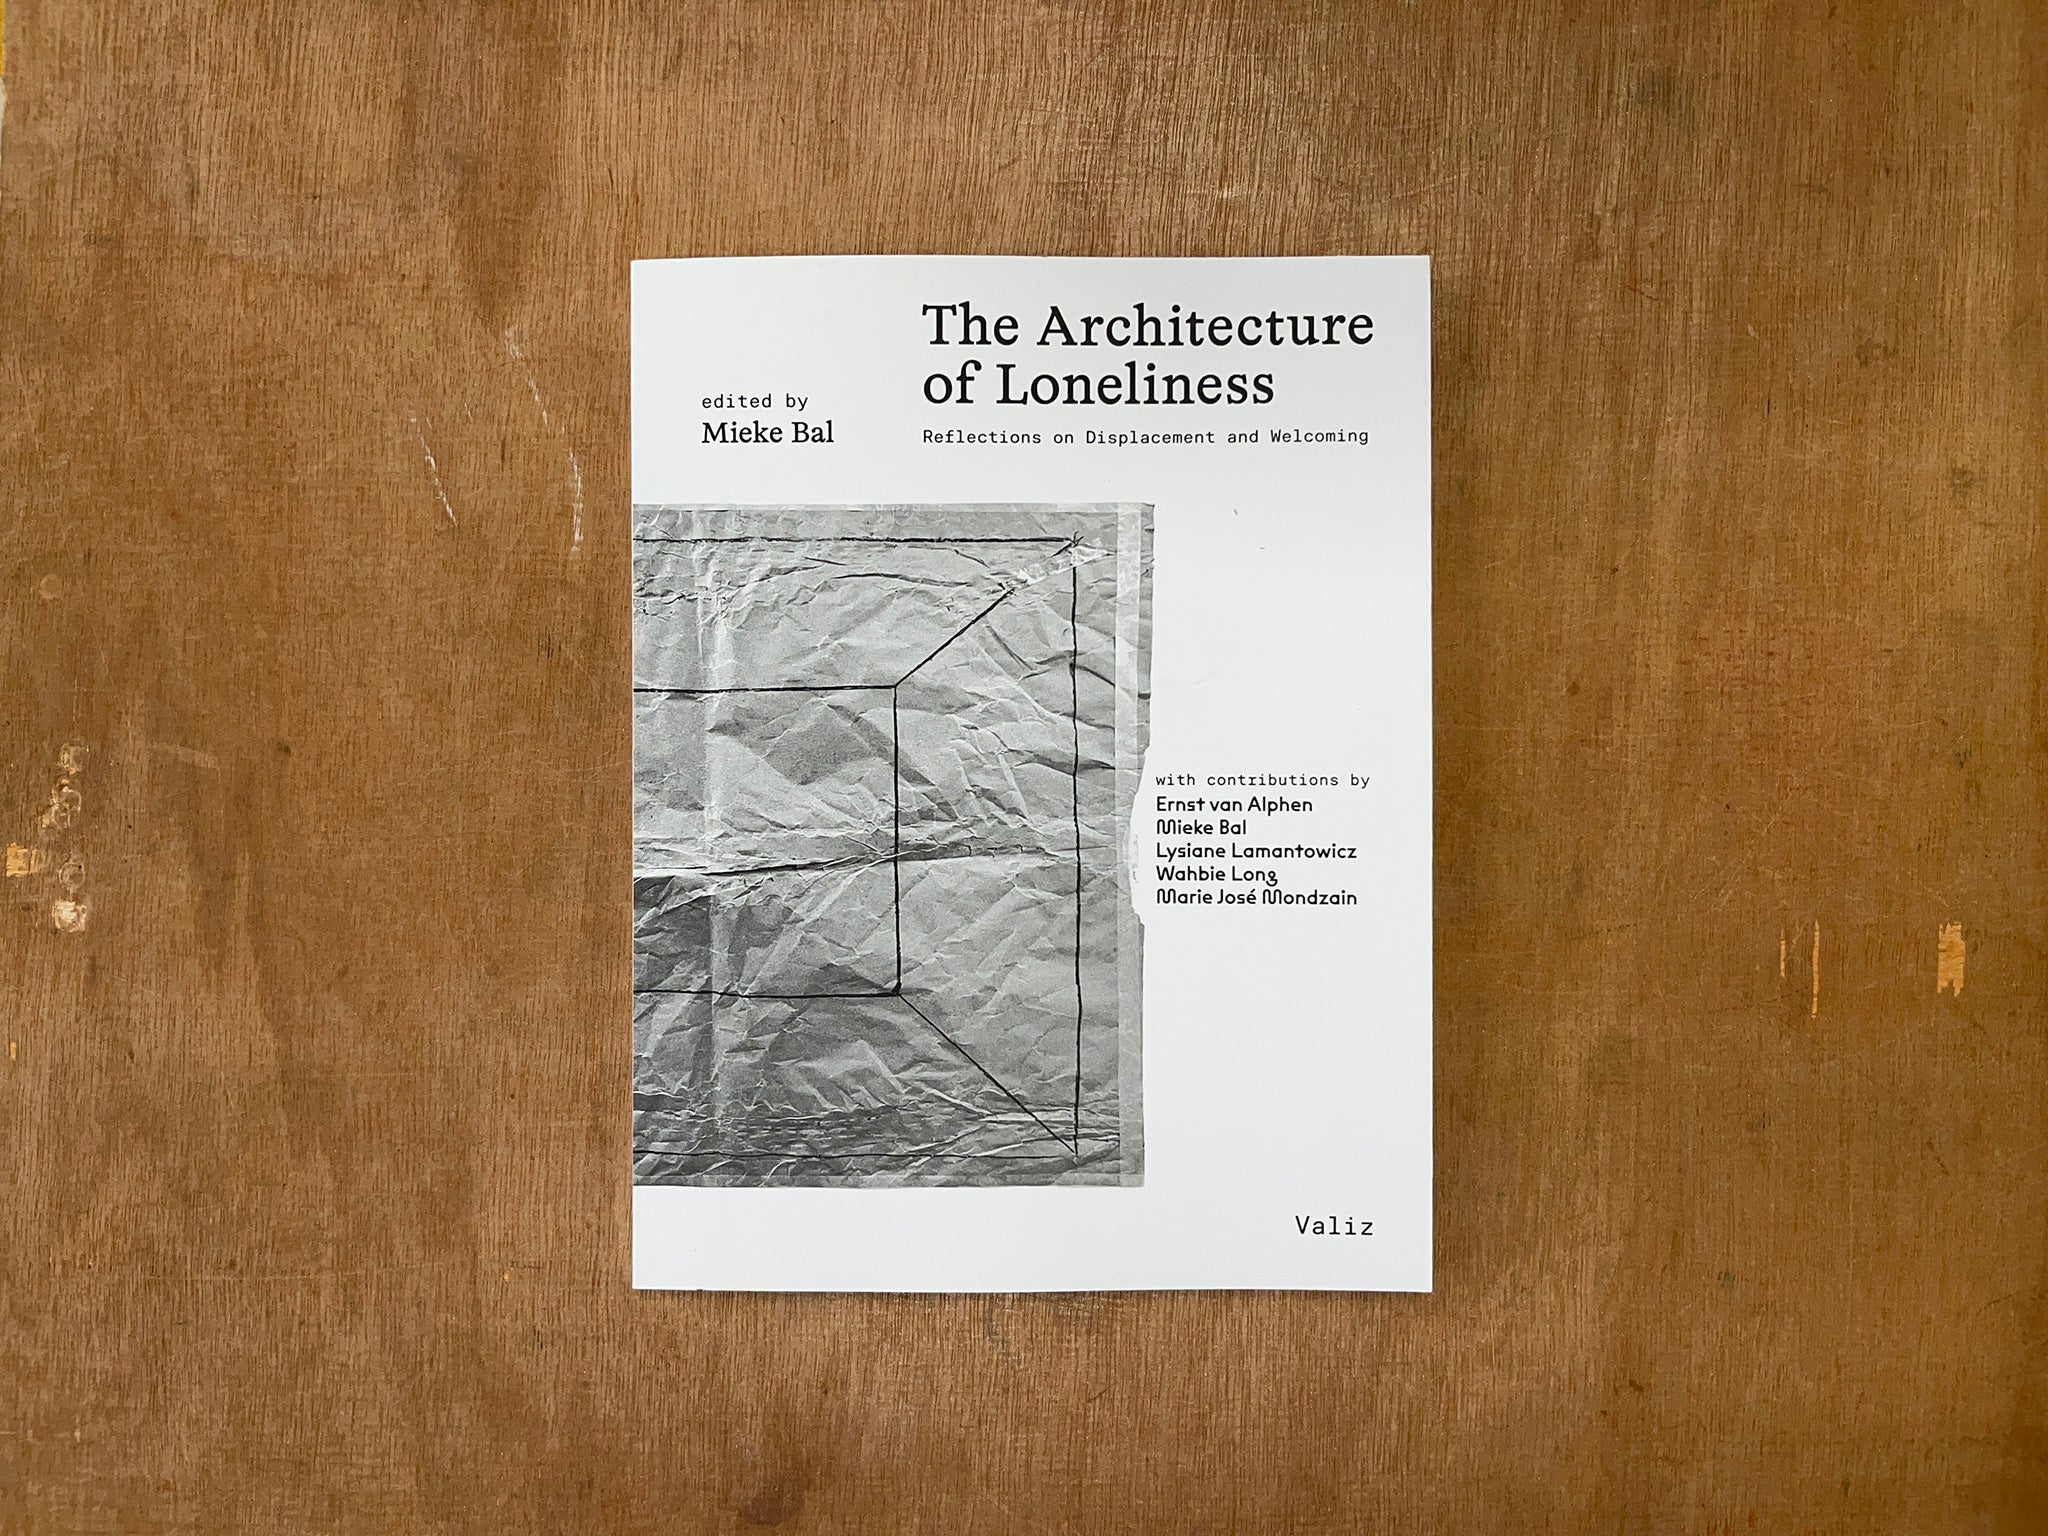 THE ARCHITECTURE OF LONELINESS Ed. by Mieke Bal